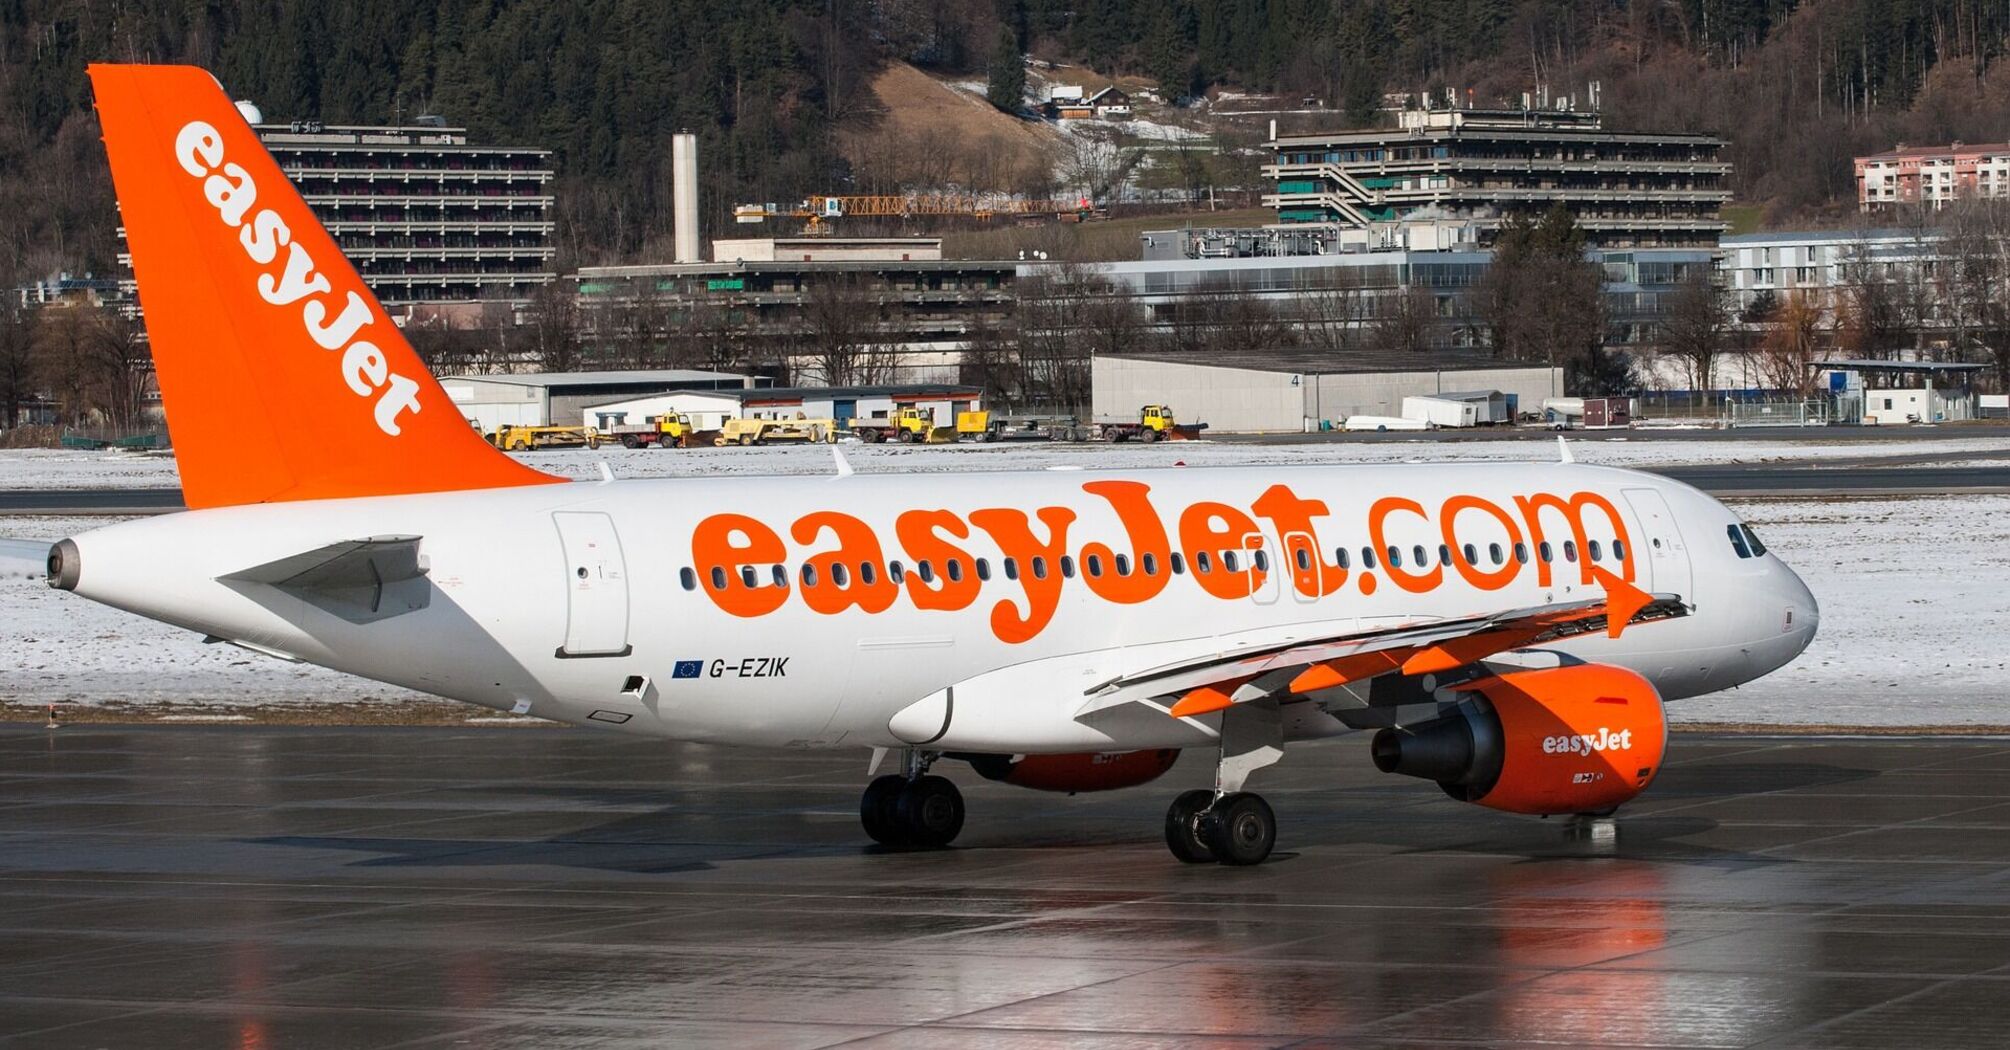 An easyJet commercial airplane on the tarmac with snowy landscape in the background 